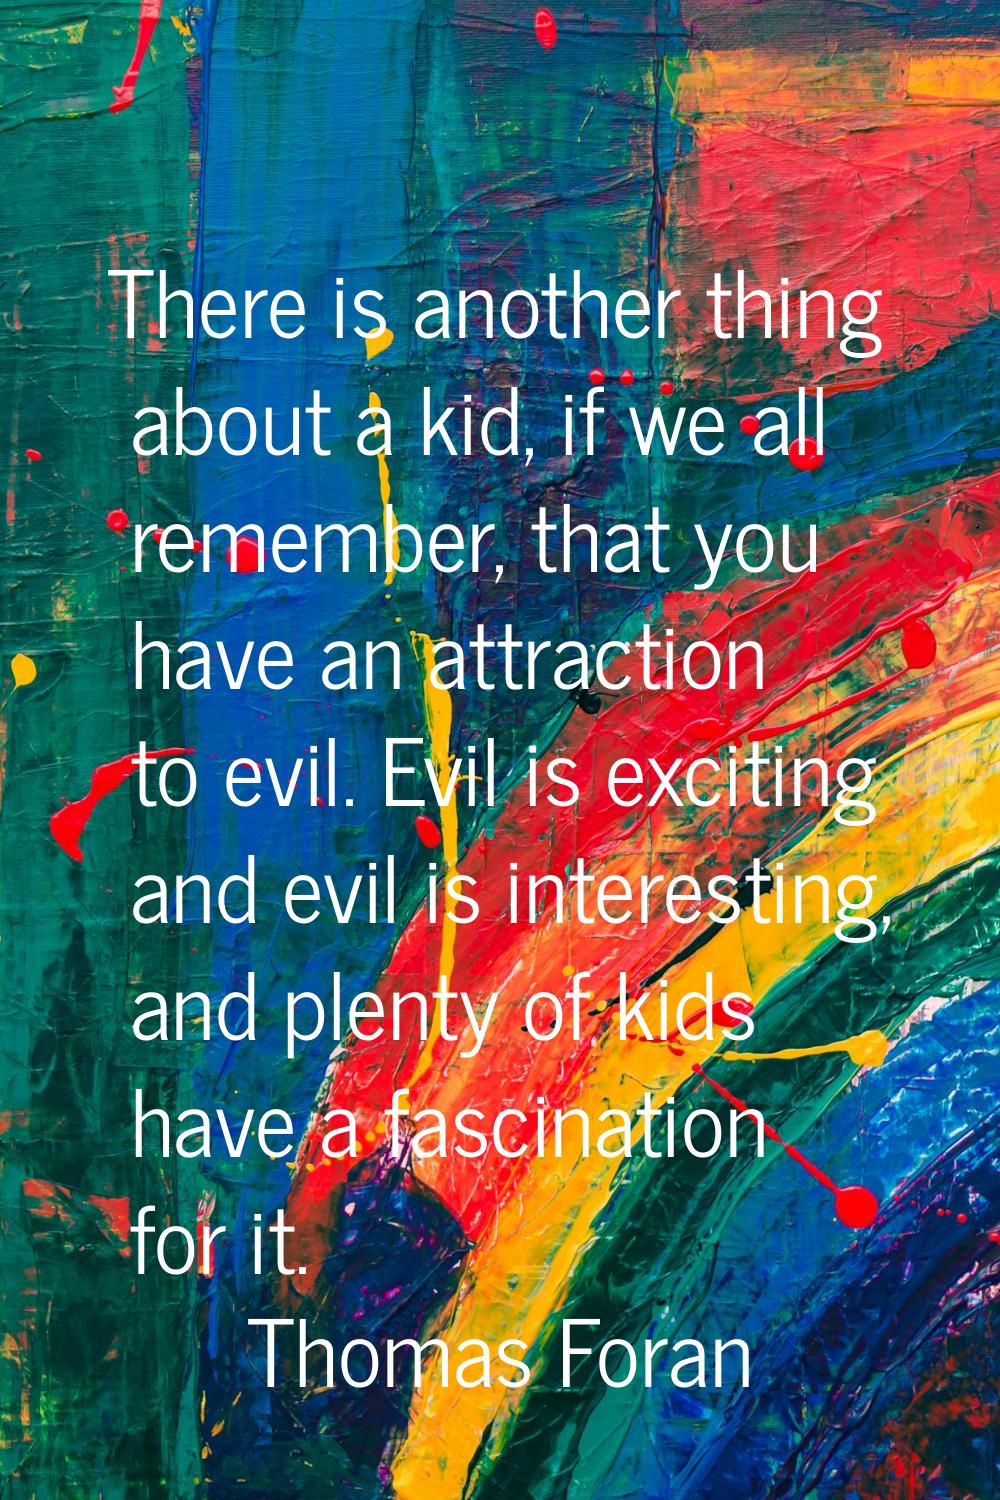 There is another thing about a kid, if we all remember, that you have an attraction to evil. Evil i